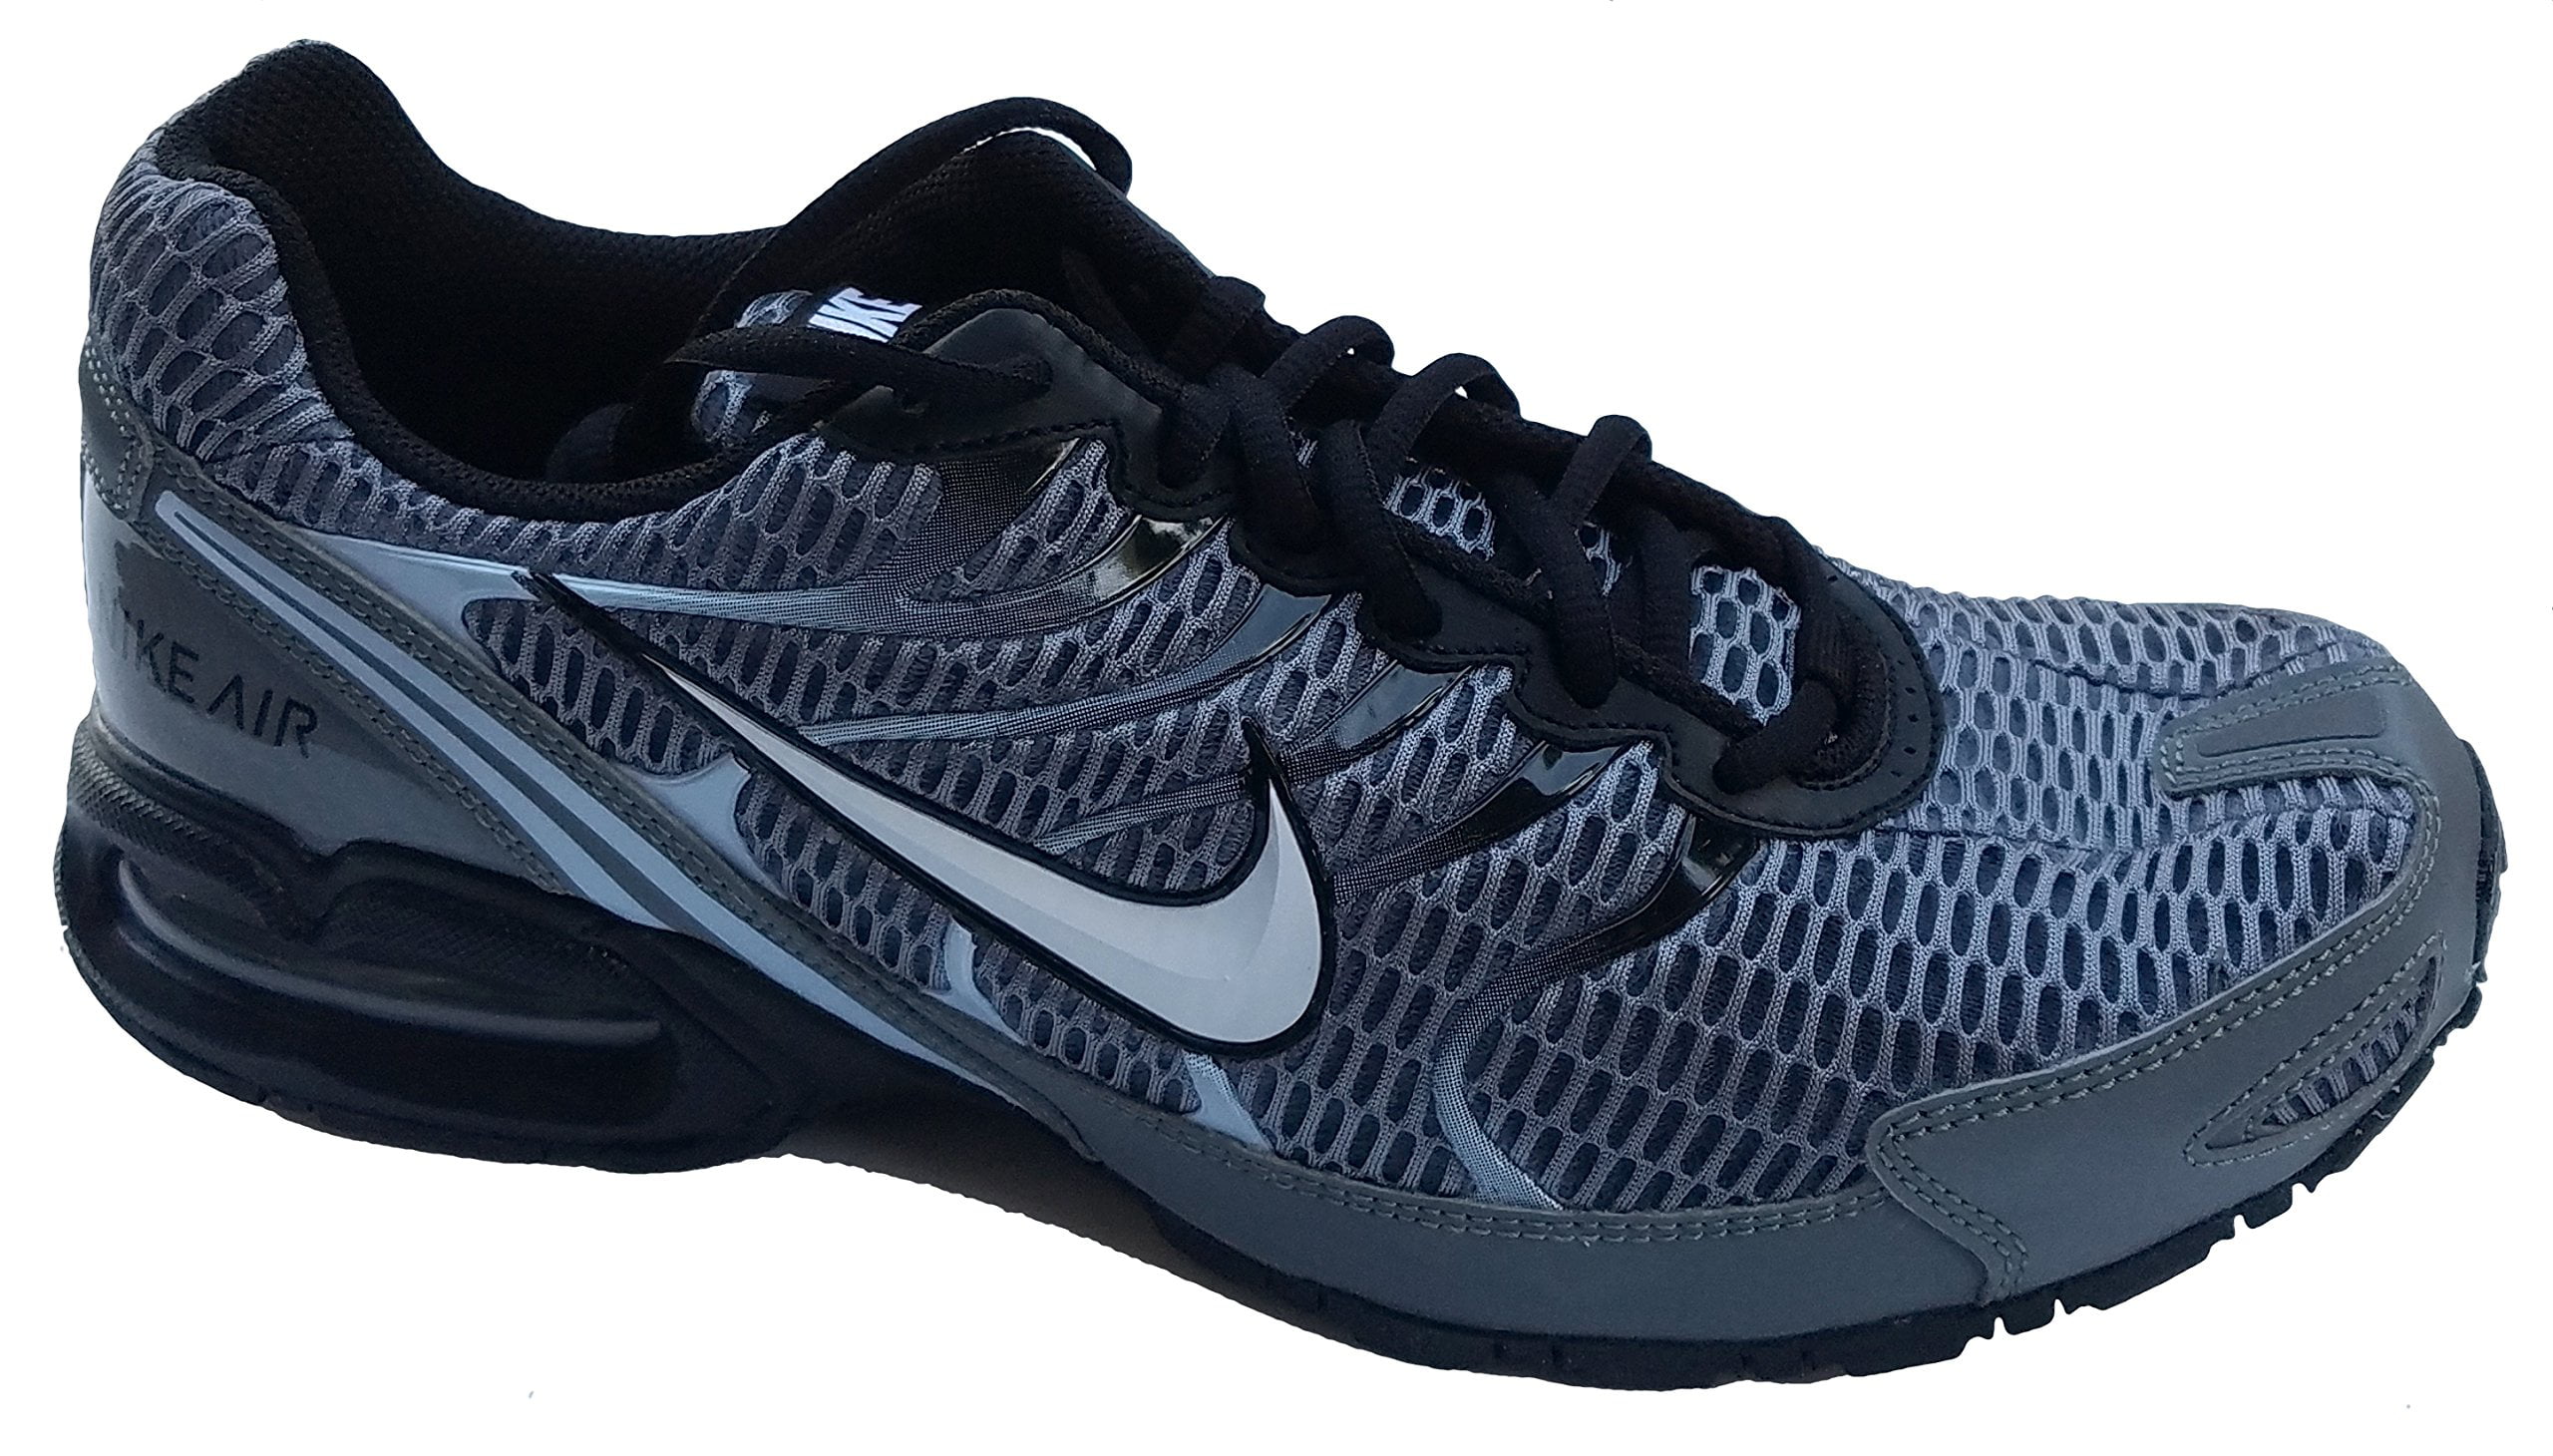 nike torch 4 running shoes